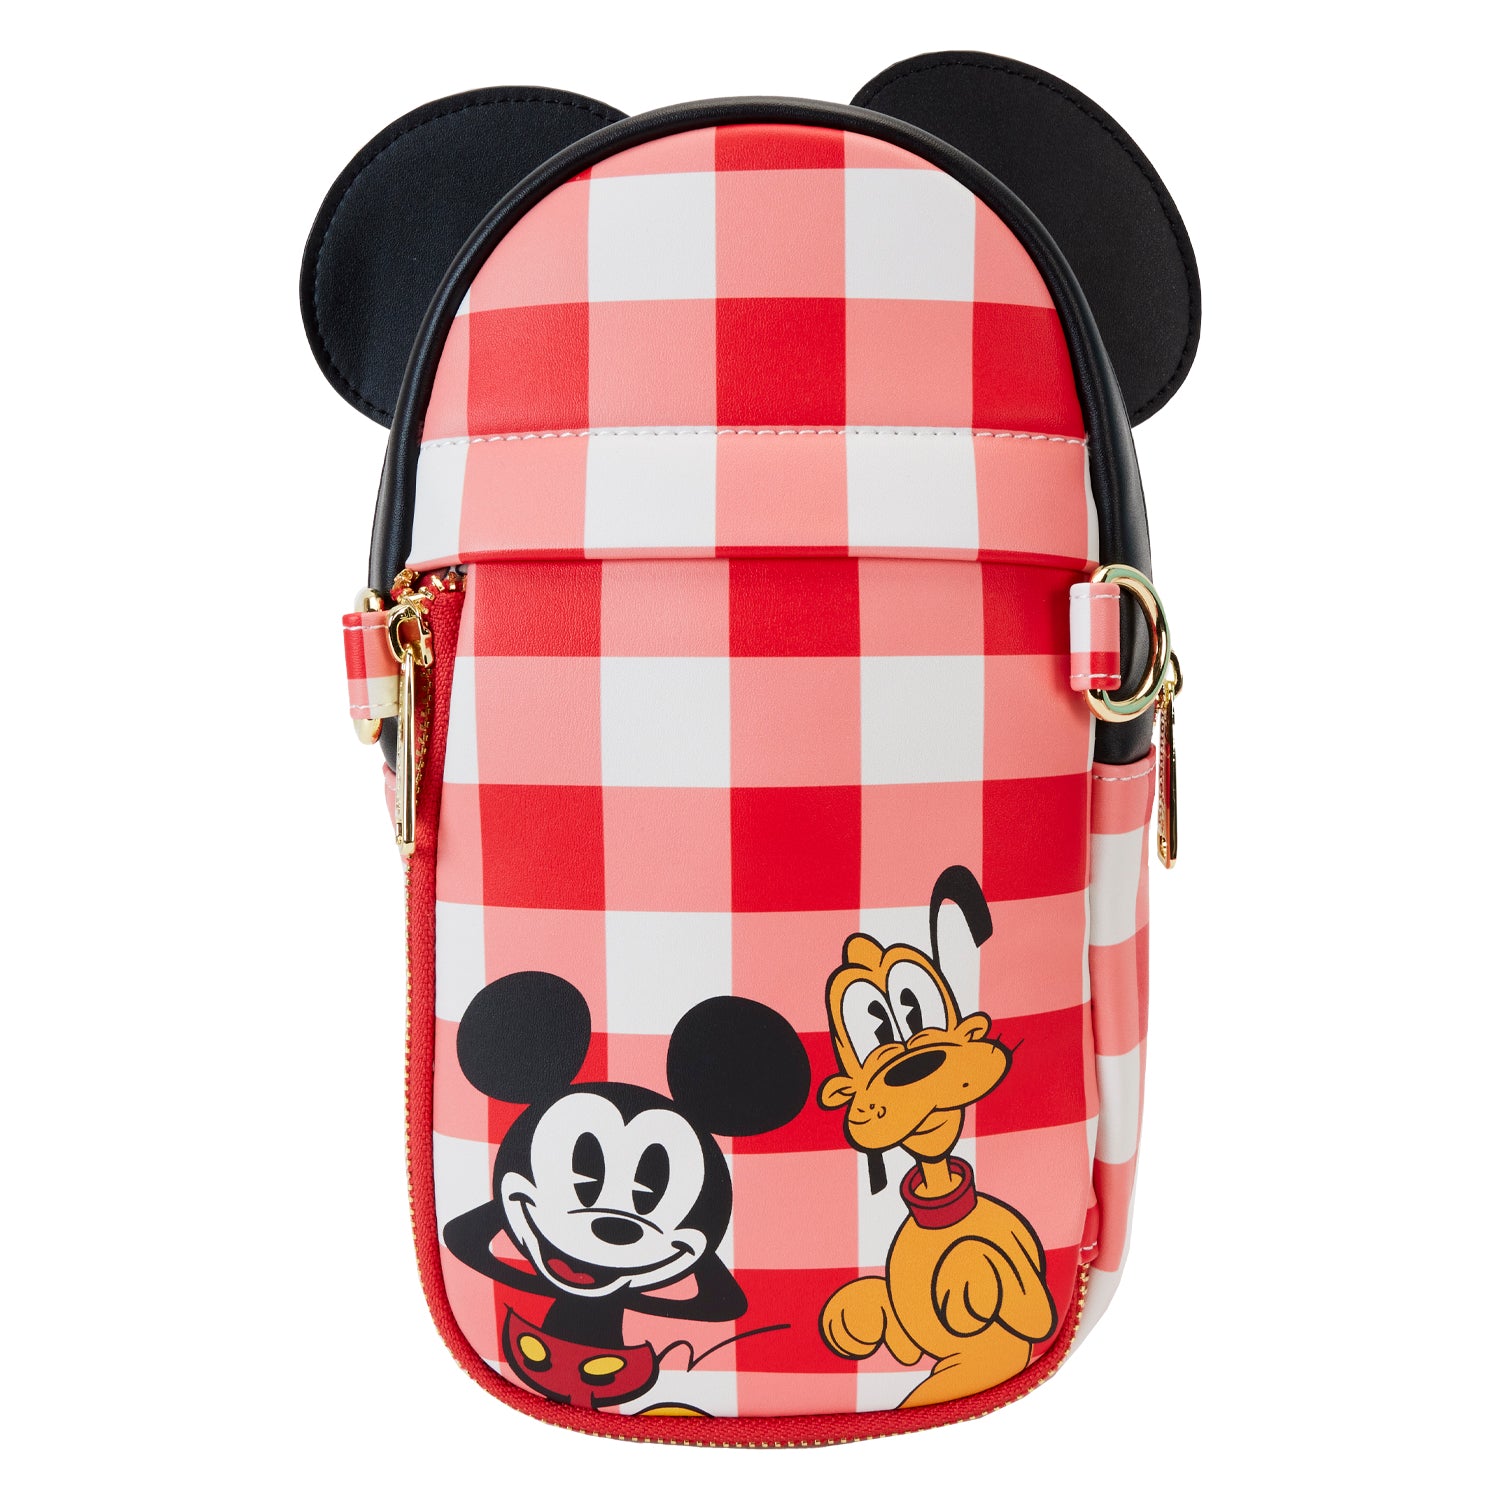 Loungefly x Disney Minnie Mouse Cup Holder Crossbody Bag